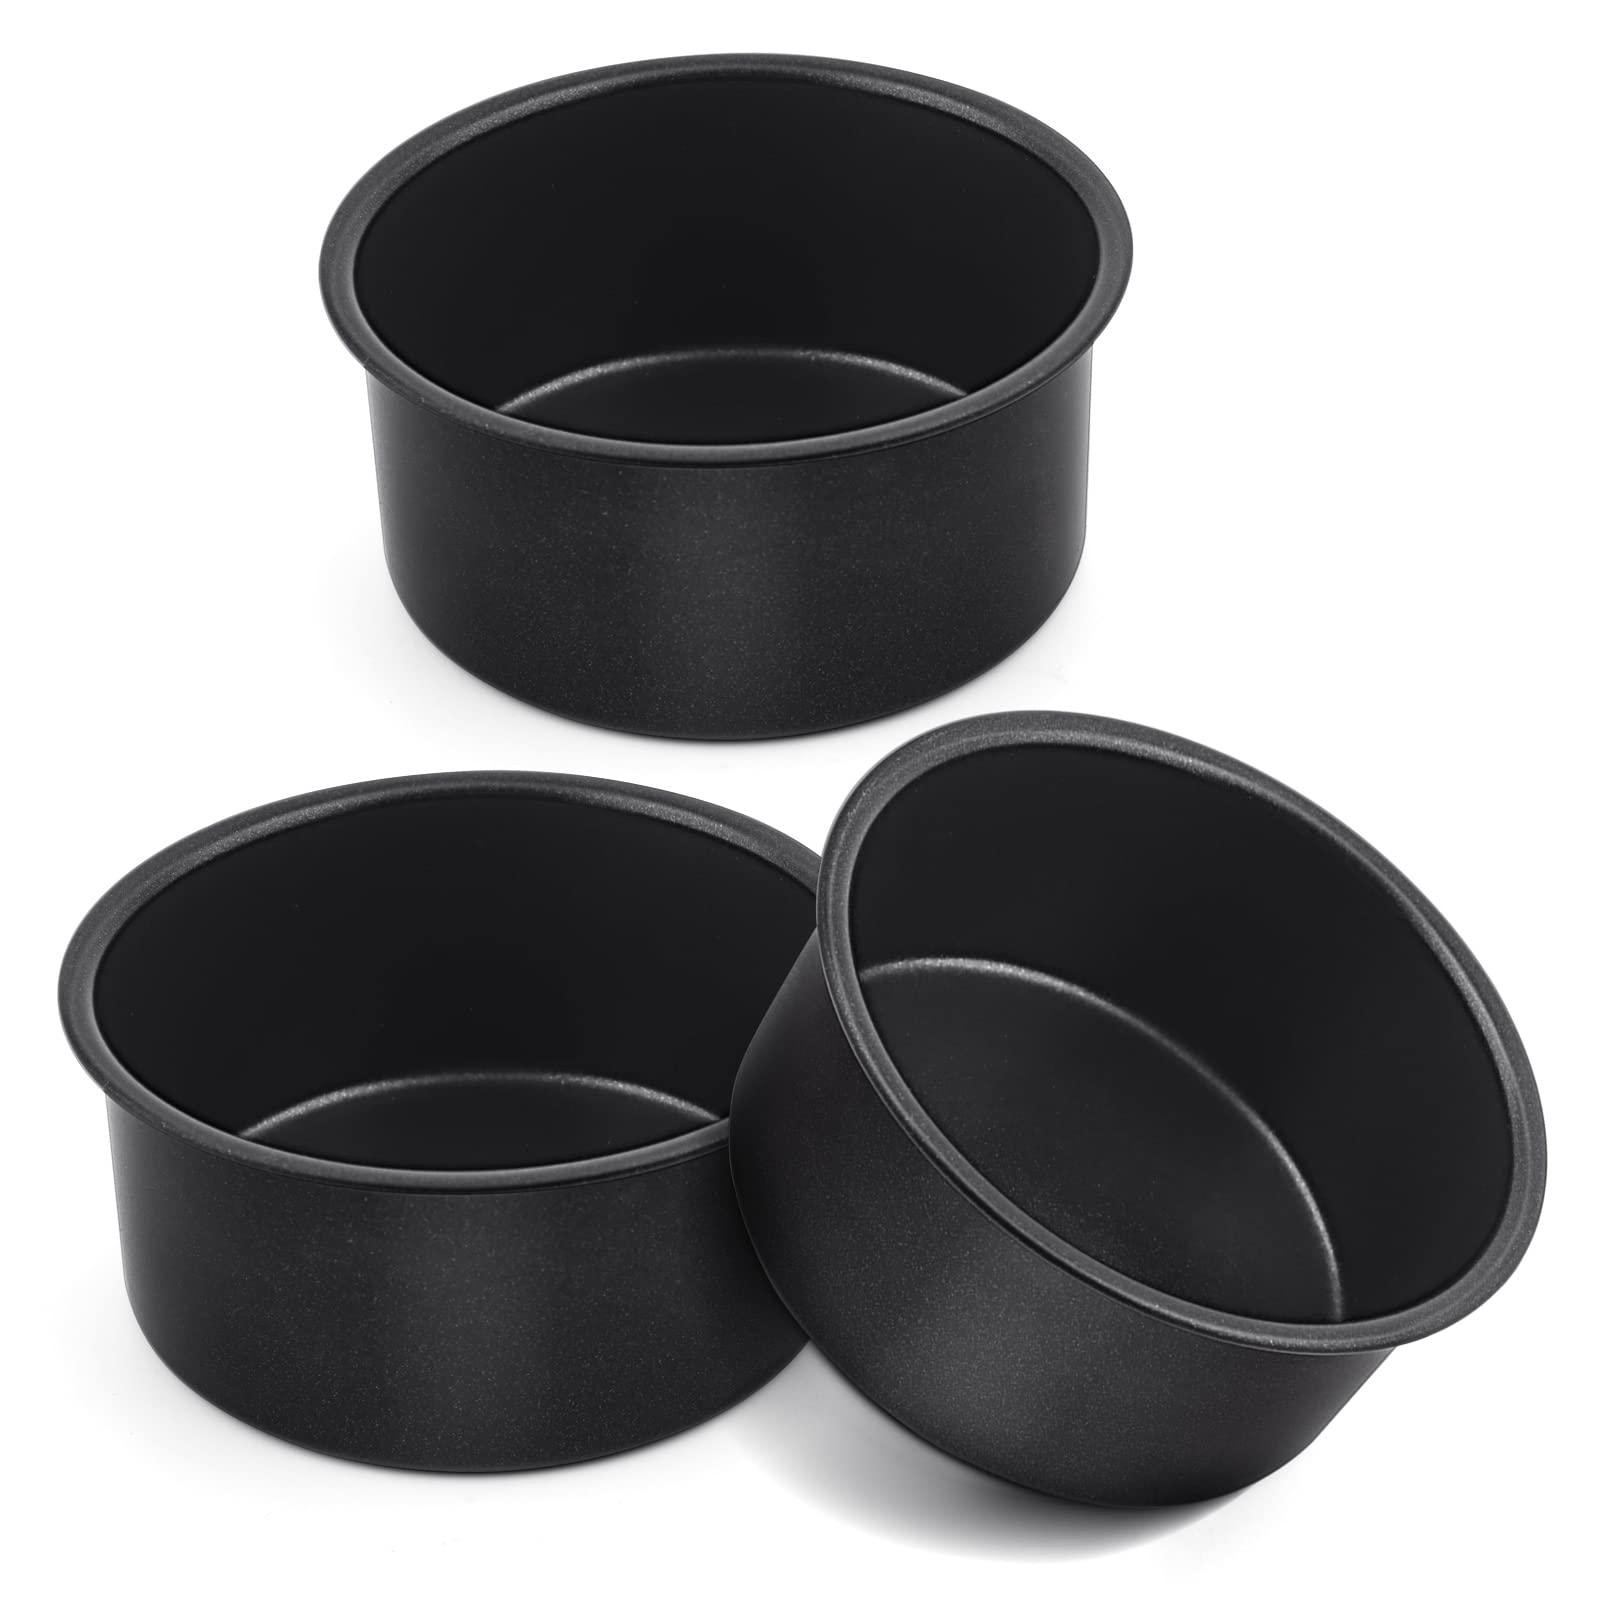 E-far 4 Inch Cake Pan Set of 3, Nonstick Stainless Steel Mini Round Cake Pans Tin, Small Size for Baking Smash Cakes/Cheesecake, Stainless Steel Core & Non-toxic Coating, Straight Side & 2 Inch Deep - CookCave